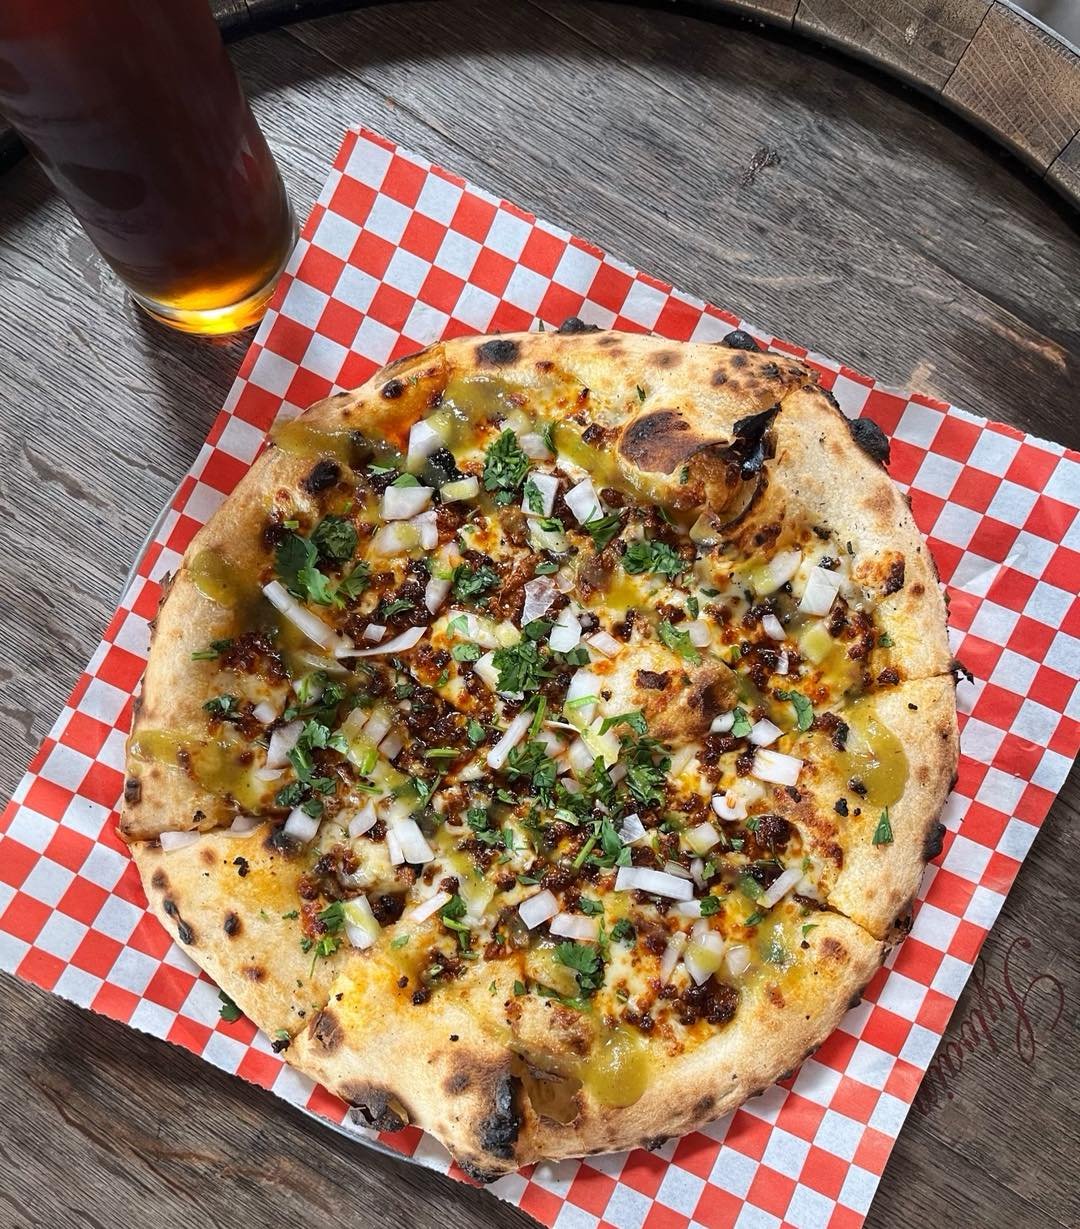 This month&rsquo;s pizza special is brought to you by one of our awesome pizza-slingers, Ulises!!
🍕Chorizo, white onions, fiorantino mozzarella, cilantro drizzled with Ten Mile verde hot sauce 🤩
AND one of our favorite beers that comes back yearly 